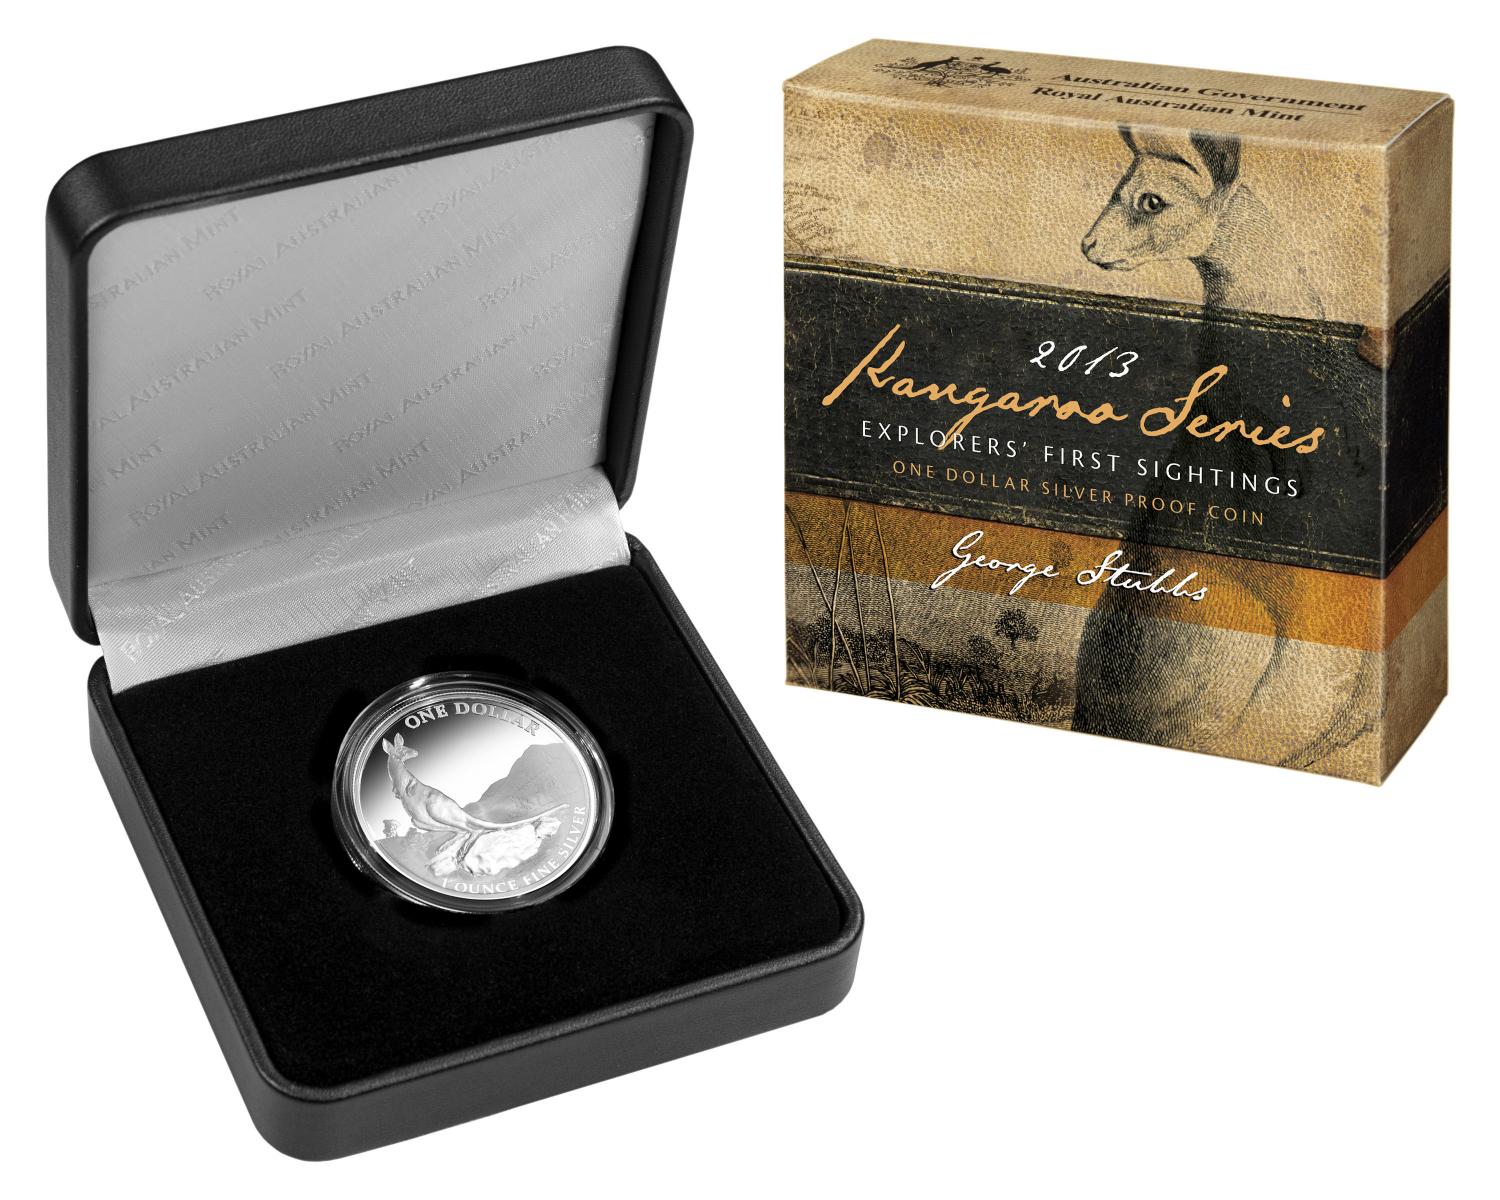 Thumbnail for 2013 1oz Silver Kangaroo Proof Coin Explorers First Sightings